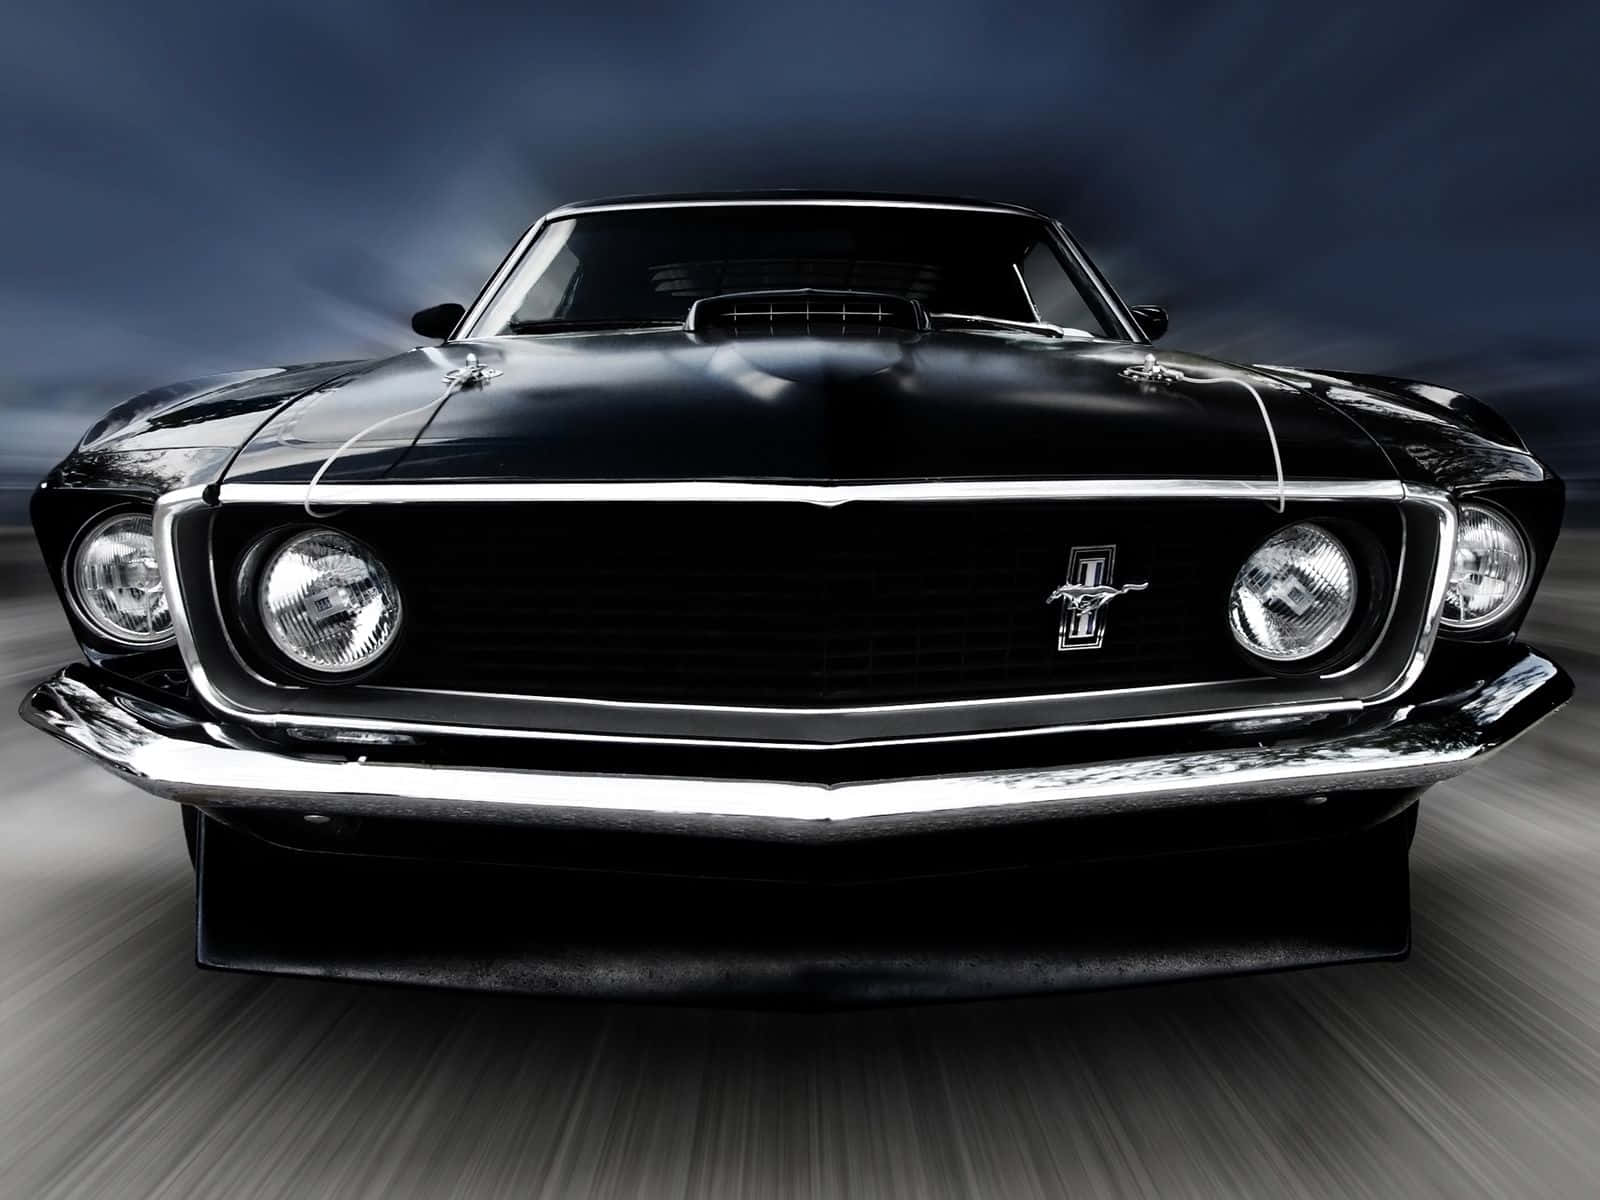 Iconic Ford Mustang Mach 1 in Action Wallpaper